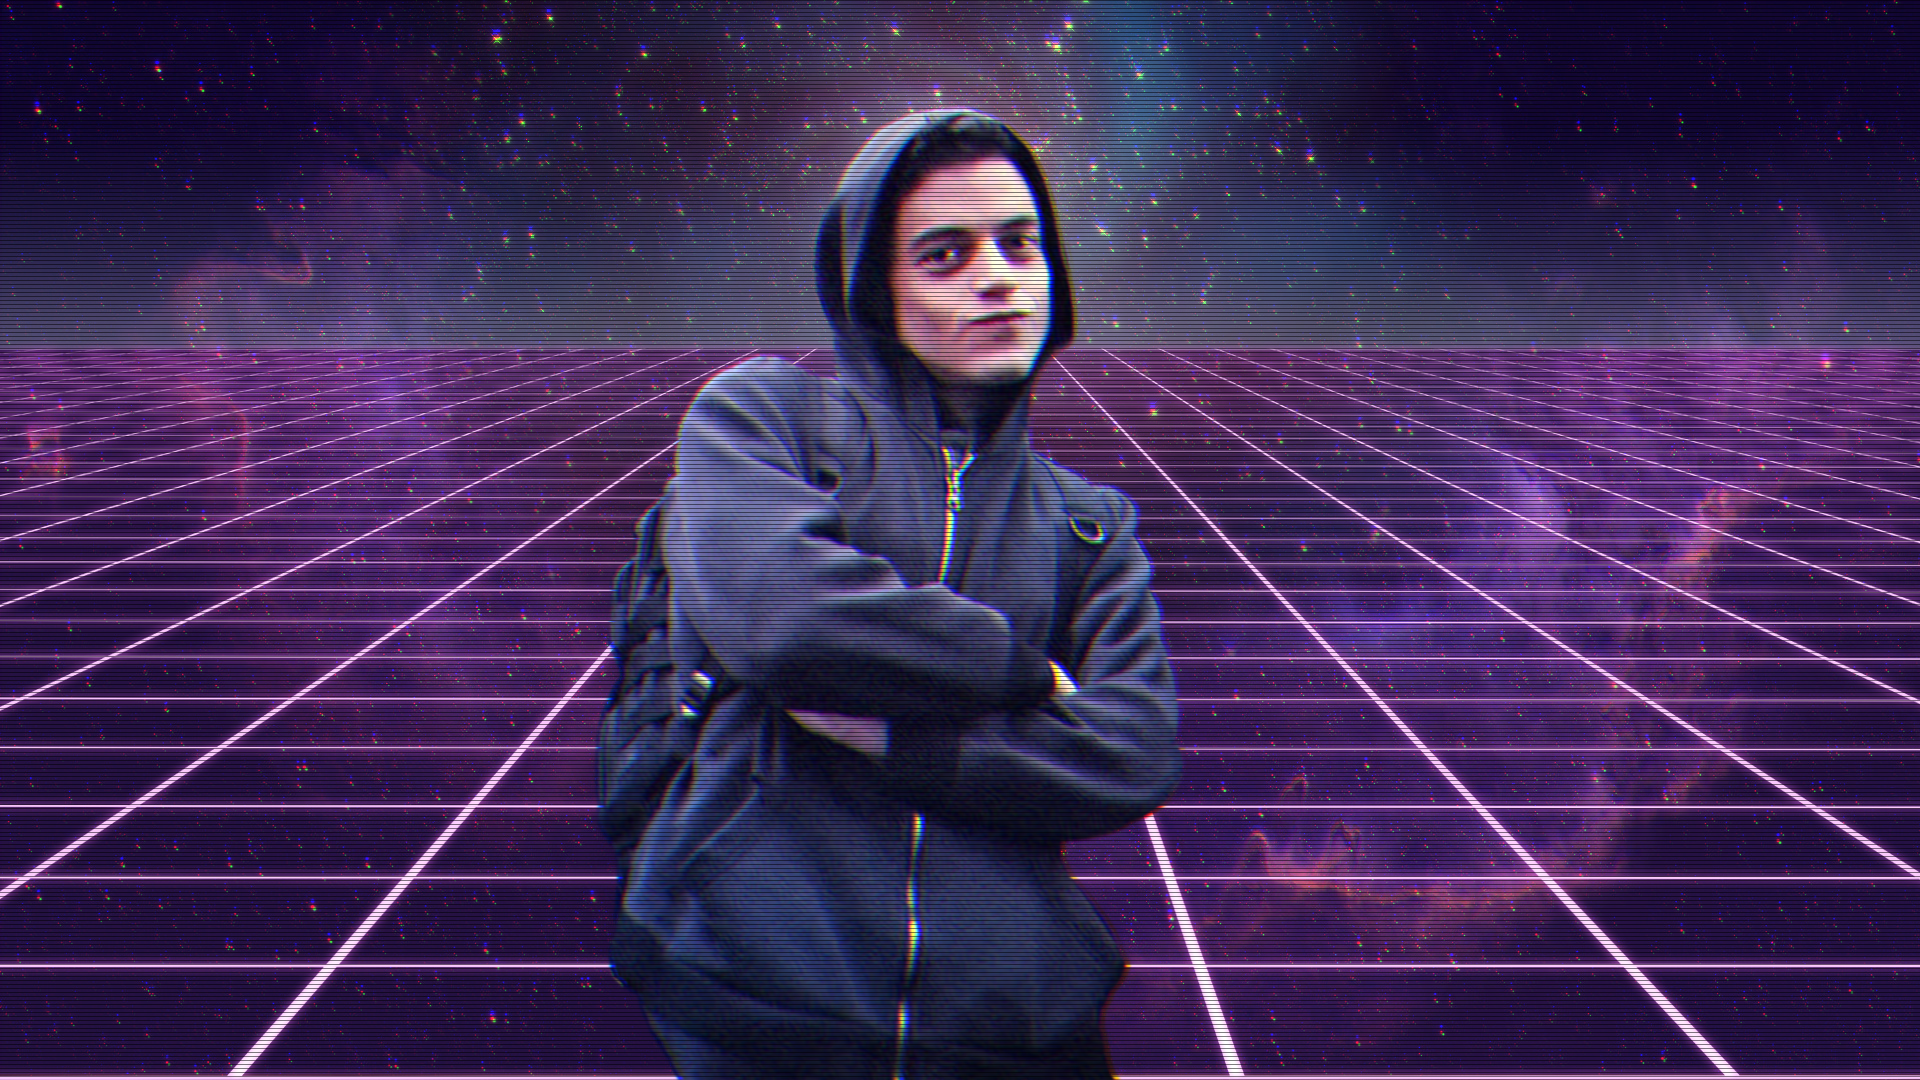 Mr. Robot And Elliot Glitch Art Wallpapers